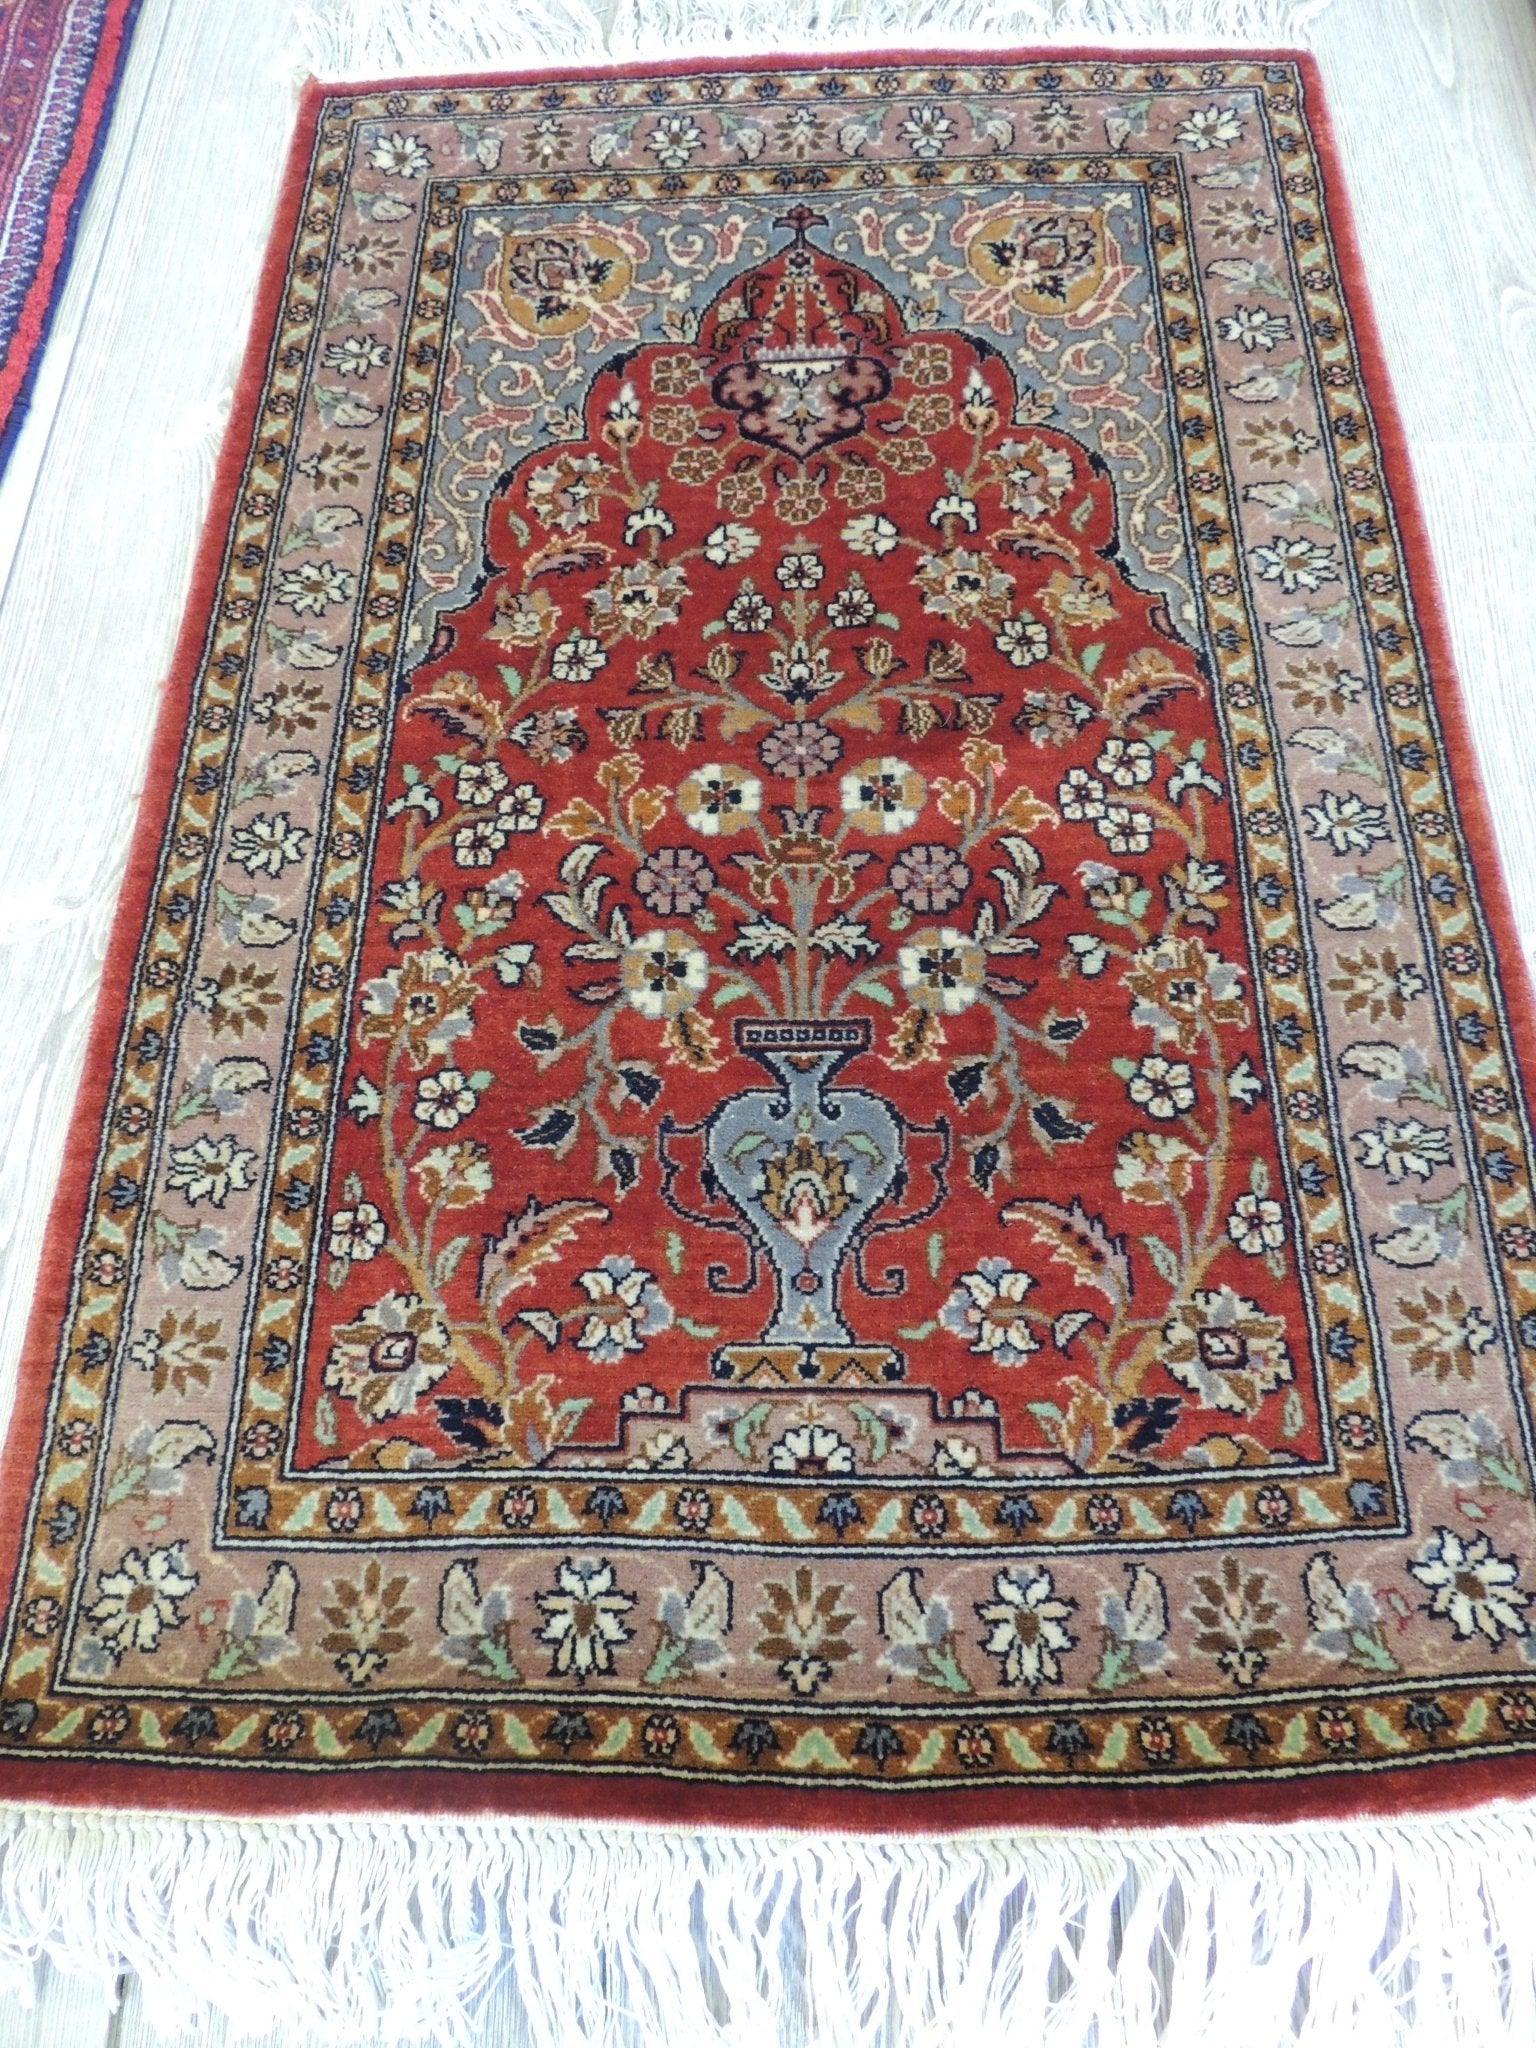 Exquisite Small Prayer Rug 2x3 Ft